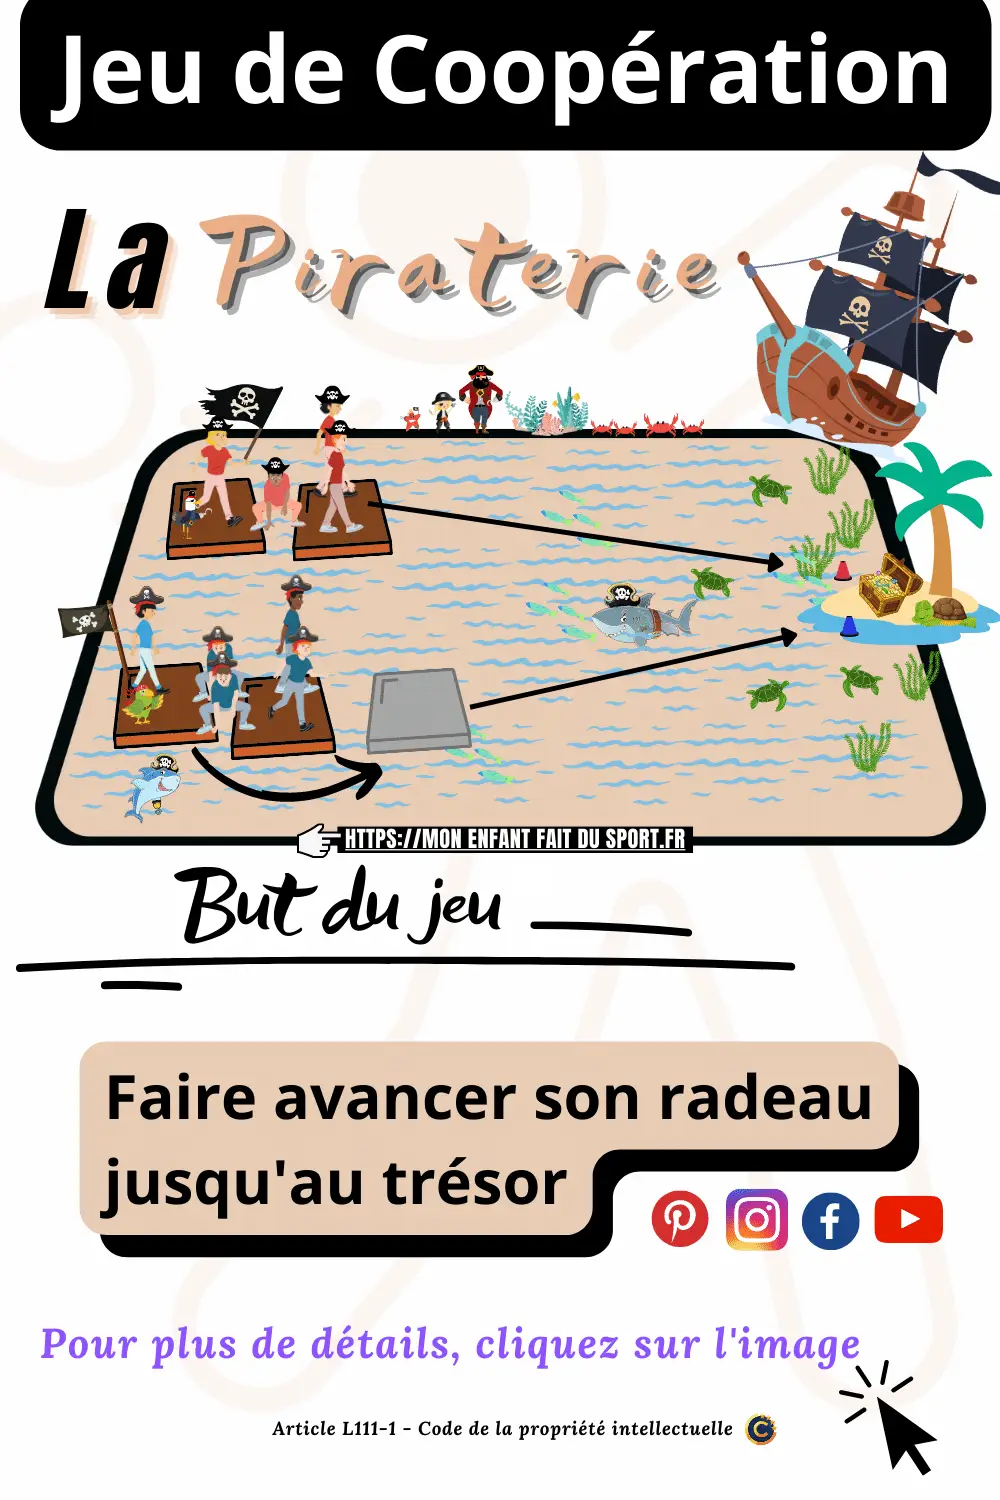 Piracy - cooperative game for kids